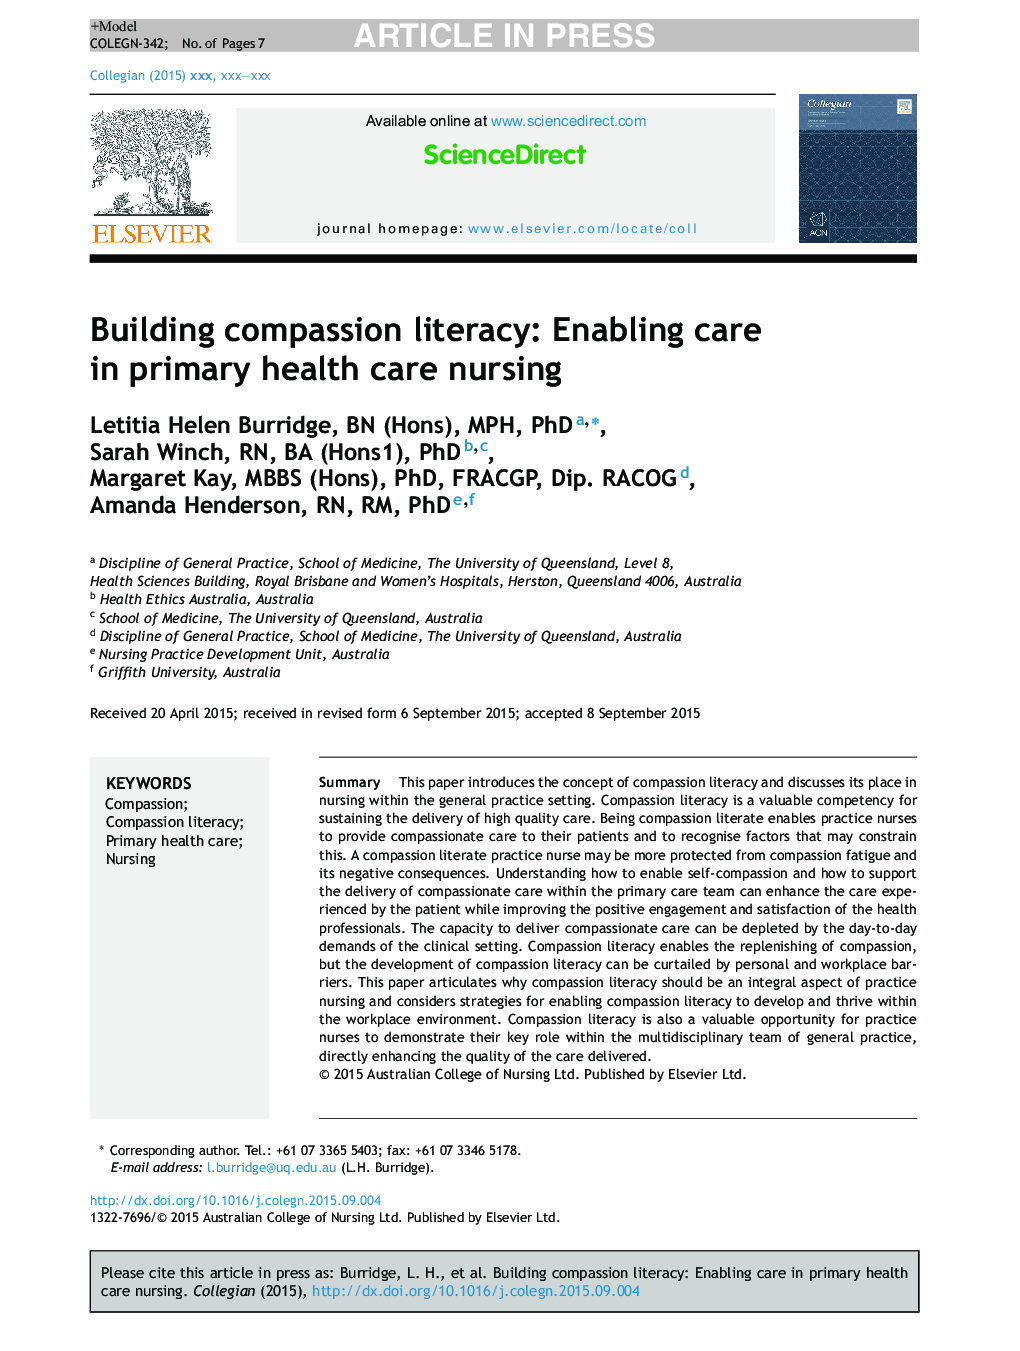 Building compassion literacy: Enabling care in primary health care nursing